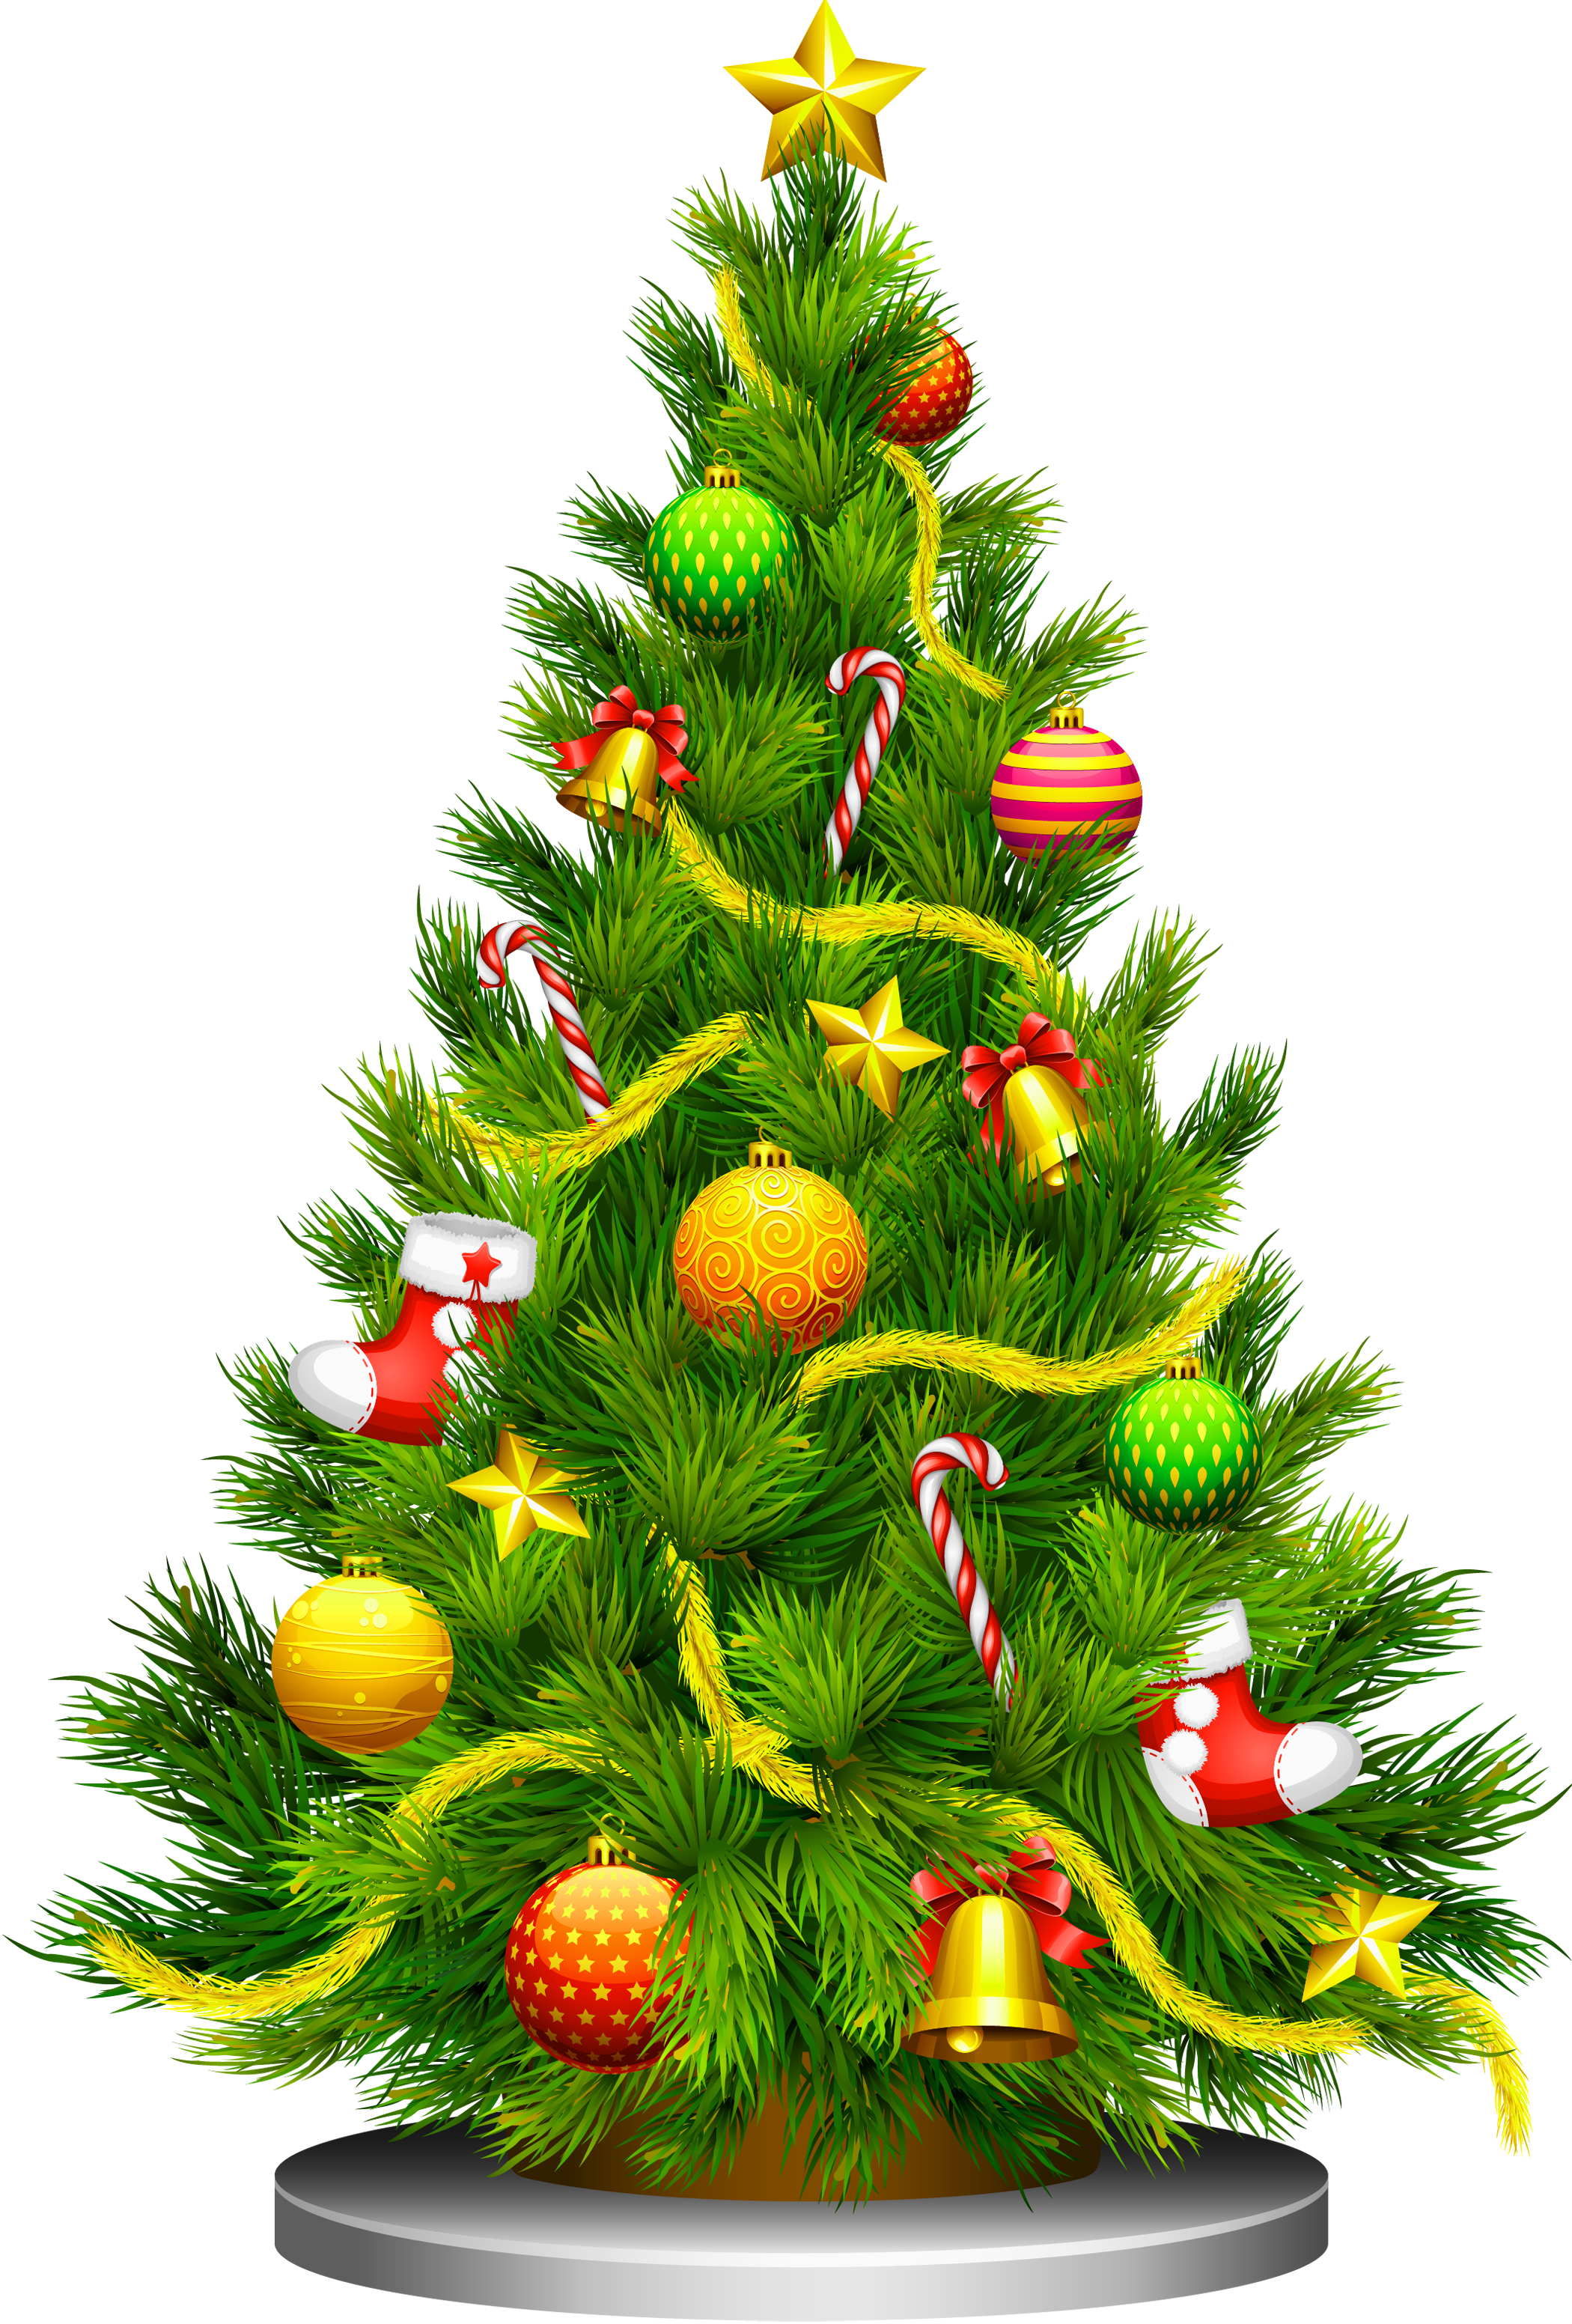 Transparent Christmas Tree Clipart | Gallery Yopriceville - High-Quality Images and Transparent ...